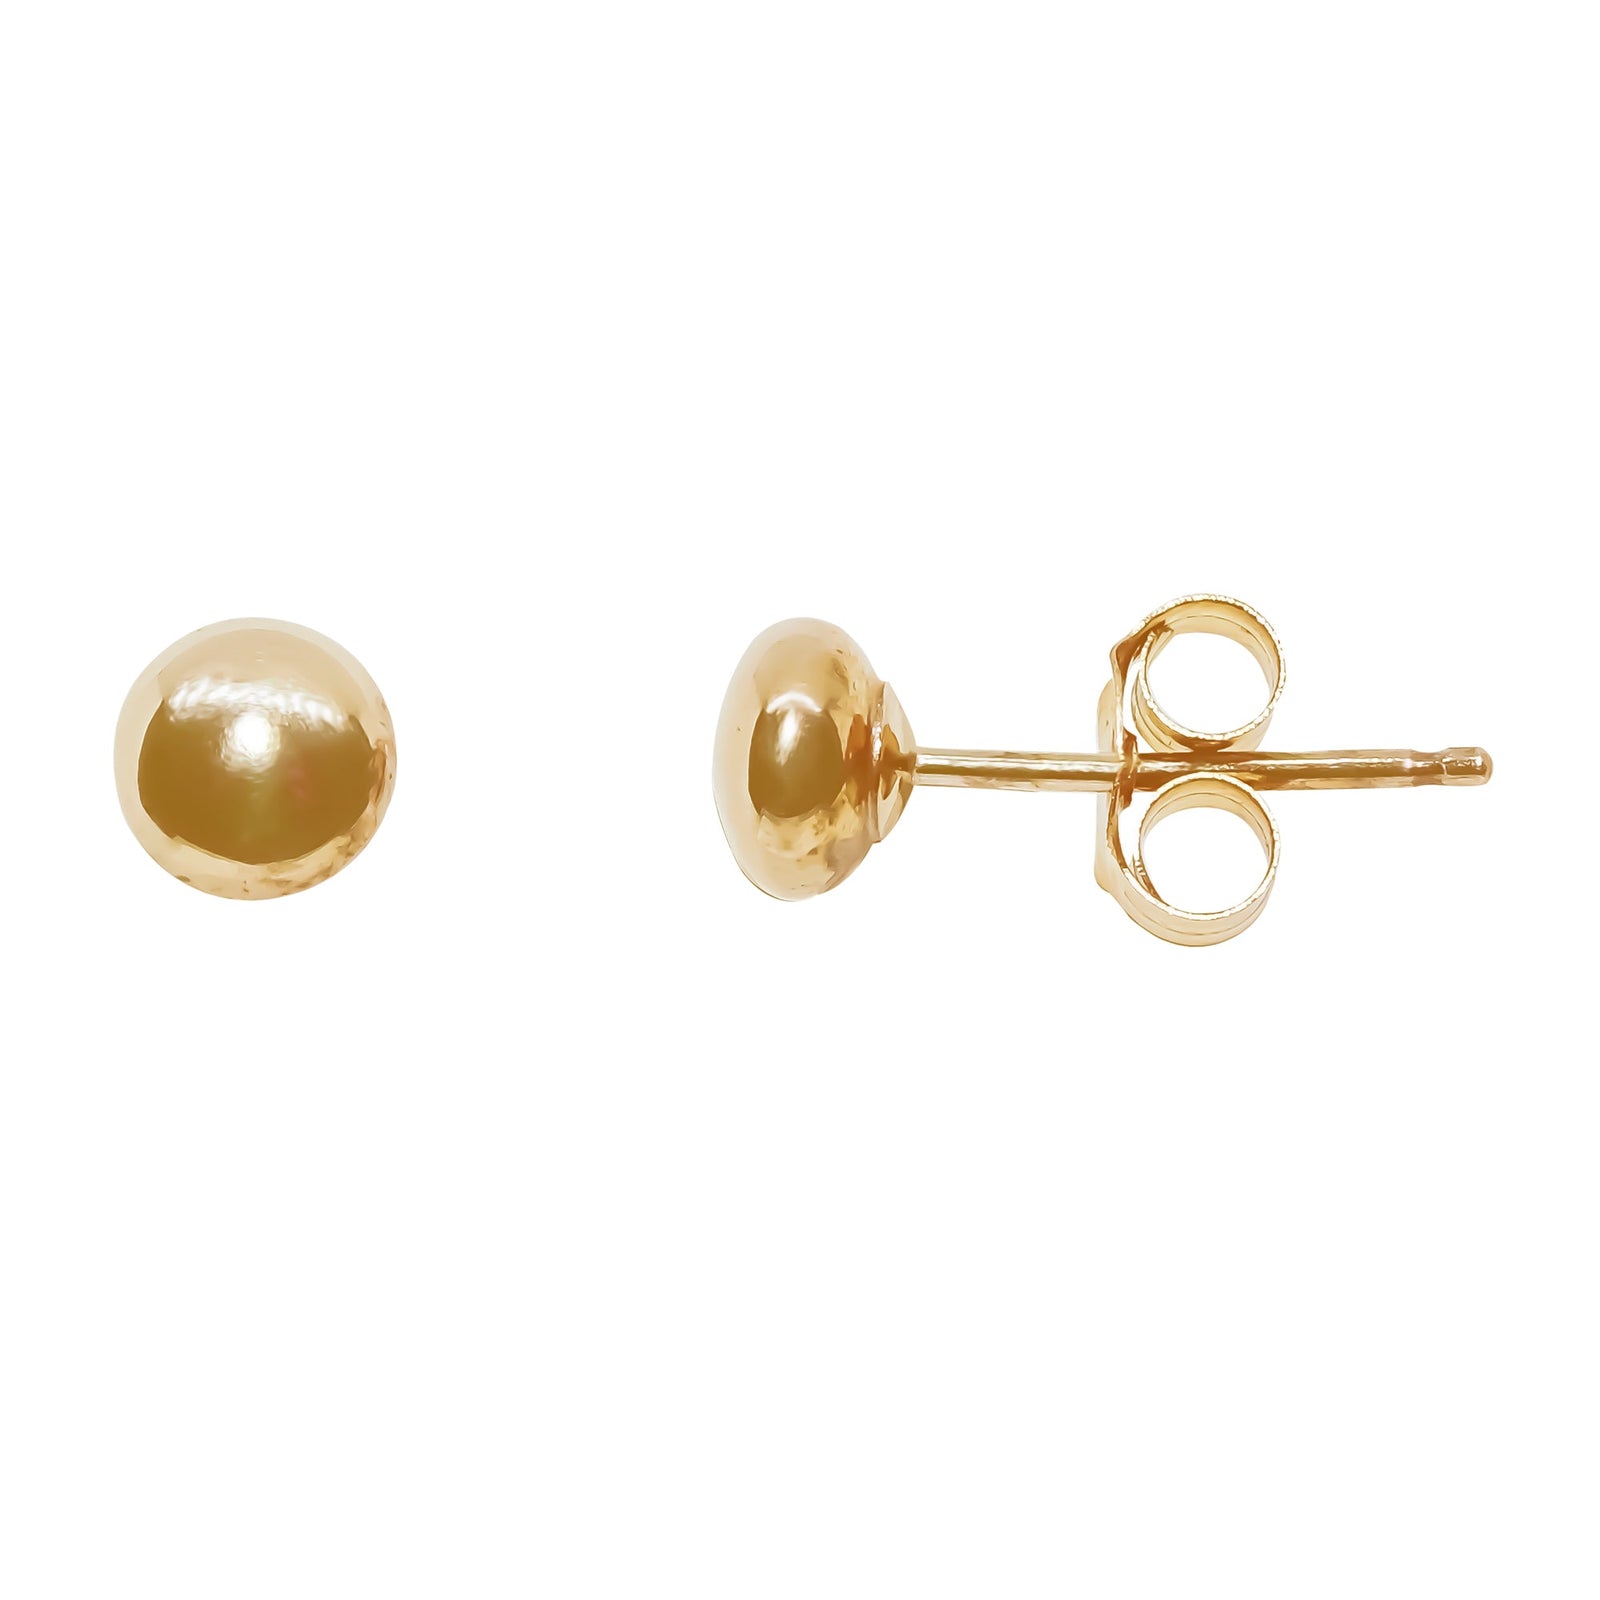 9ct gold 4mm bouton stud earrings